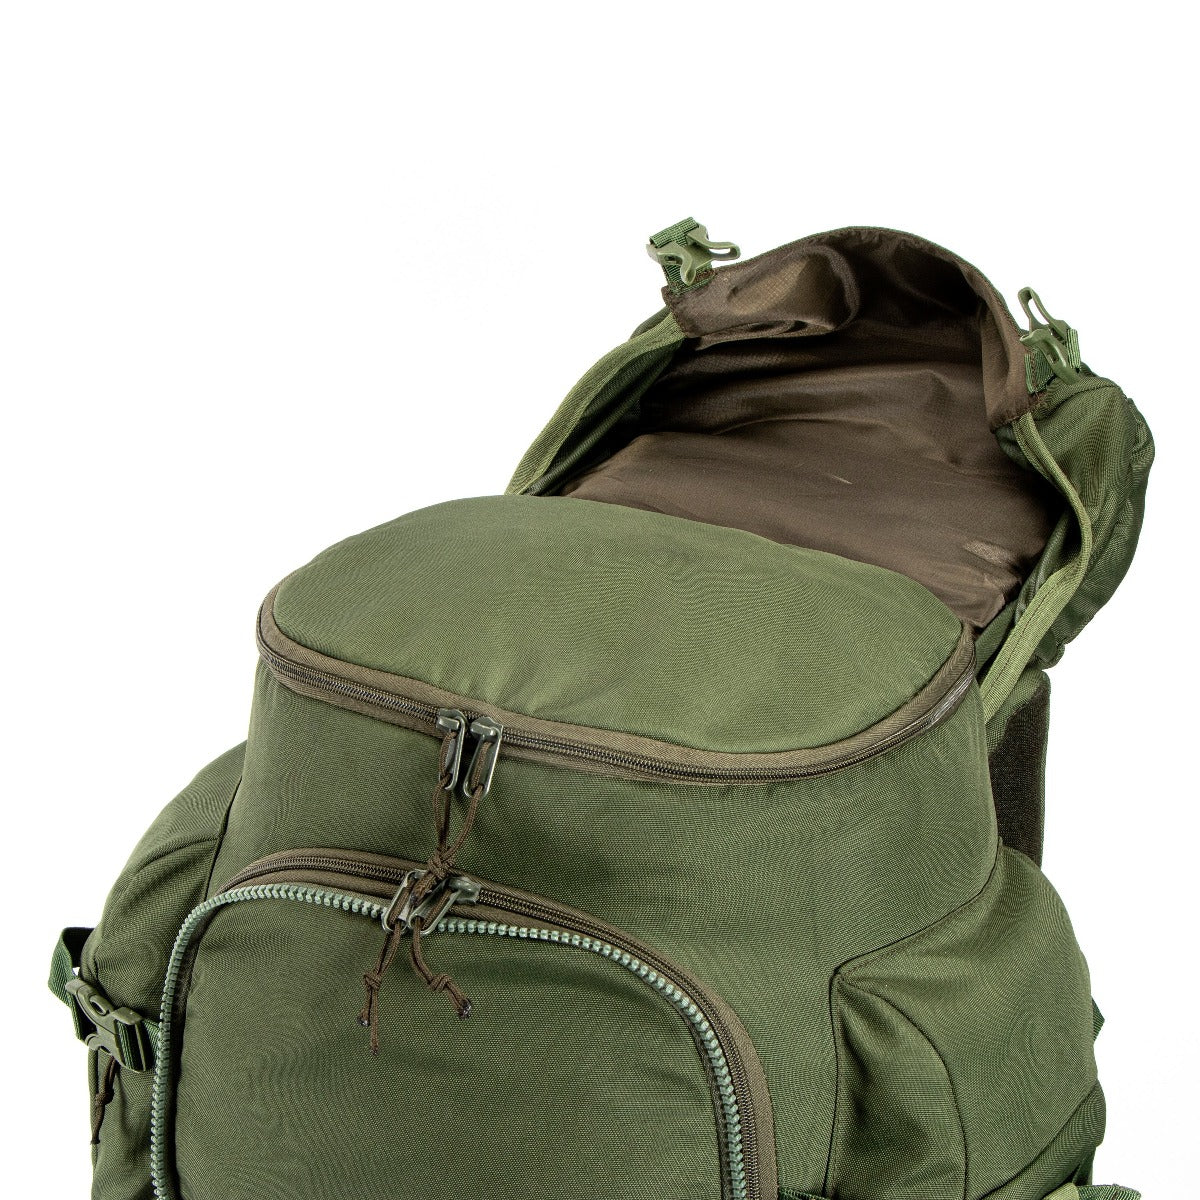 Colonel Pro Metal Frame Rucksack + Detachable Bag & Rain Cover - 90 Litres - Army Green 7